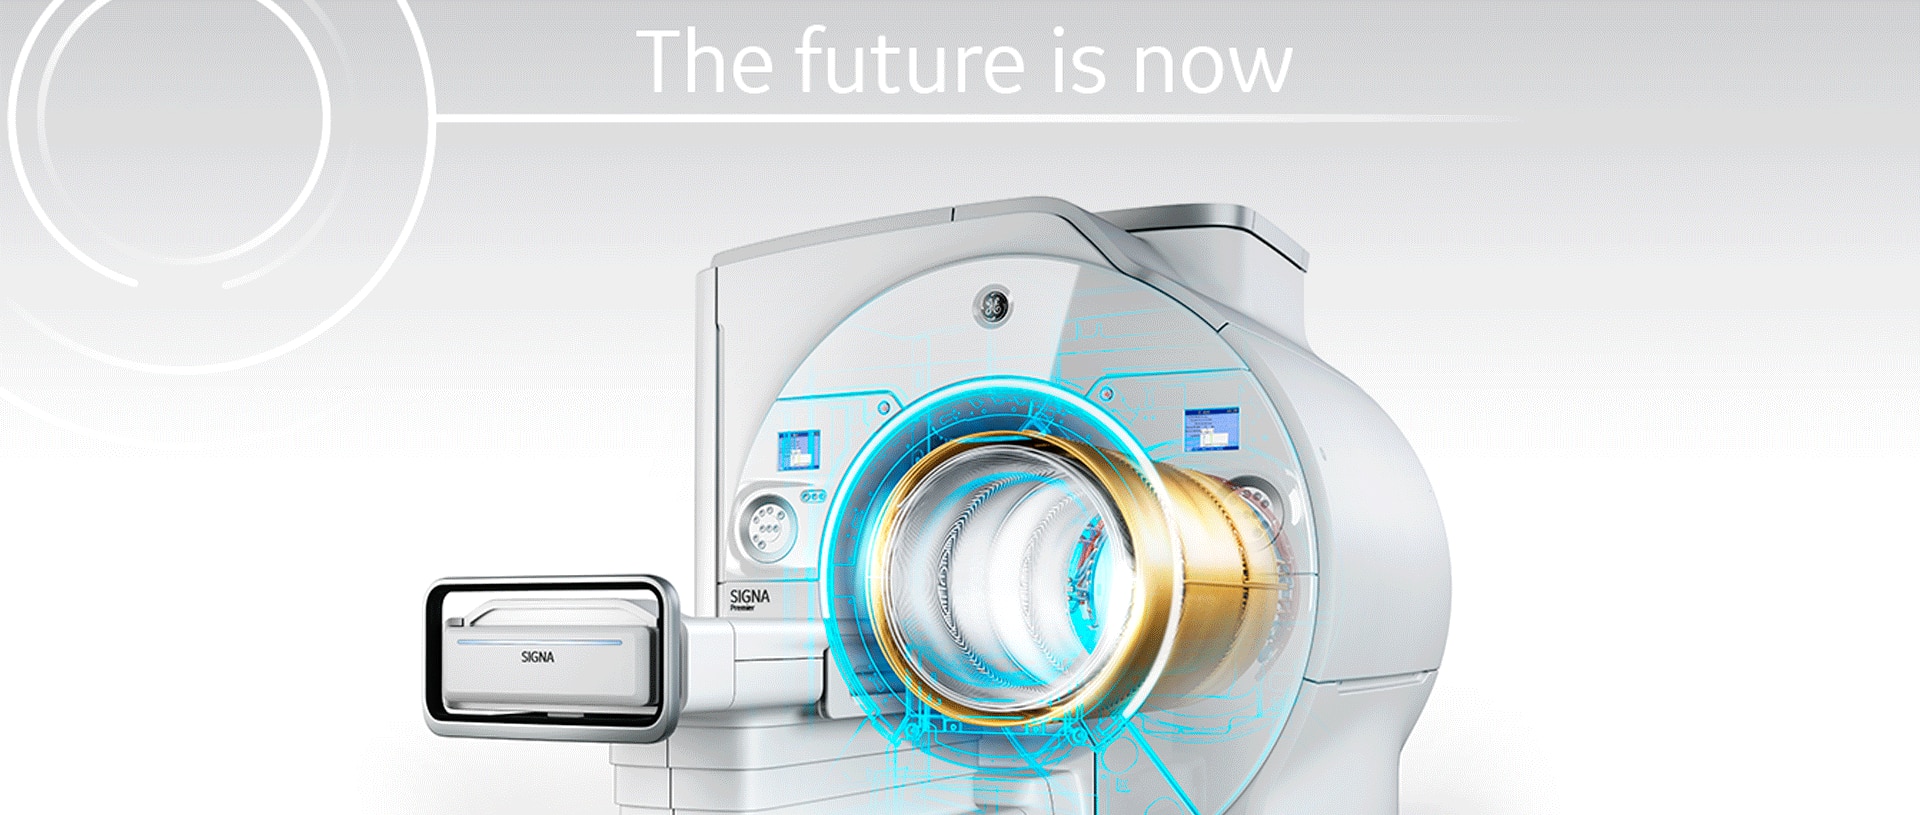 product-product-categories-magnetic-resonance-imaging-signa-premier-The_future_is_now